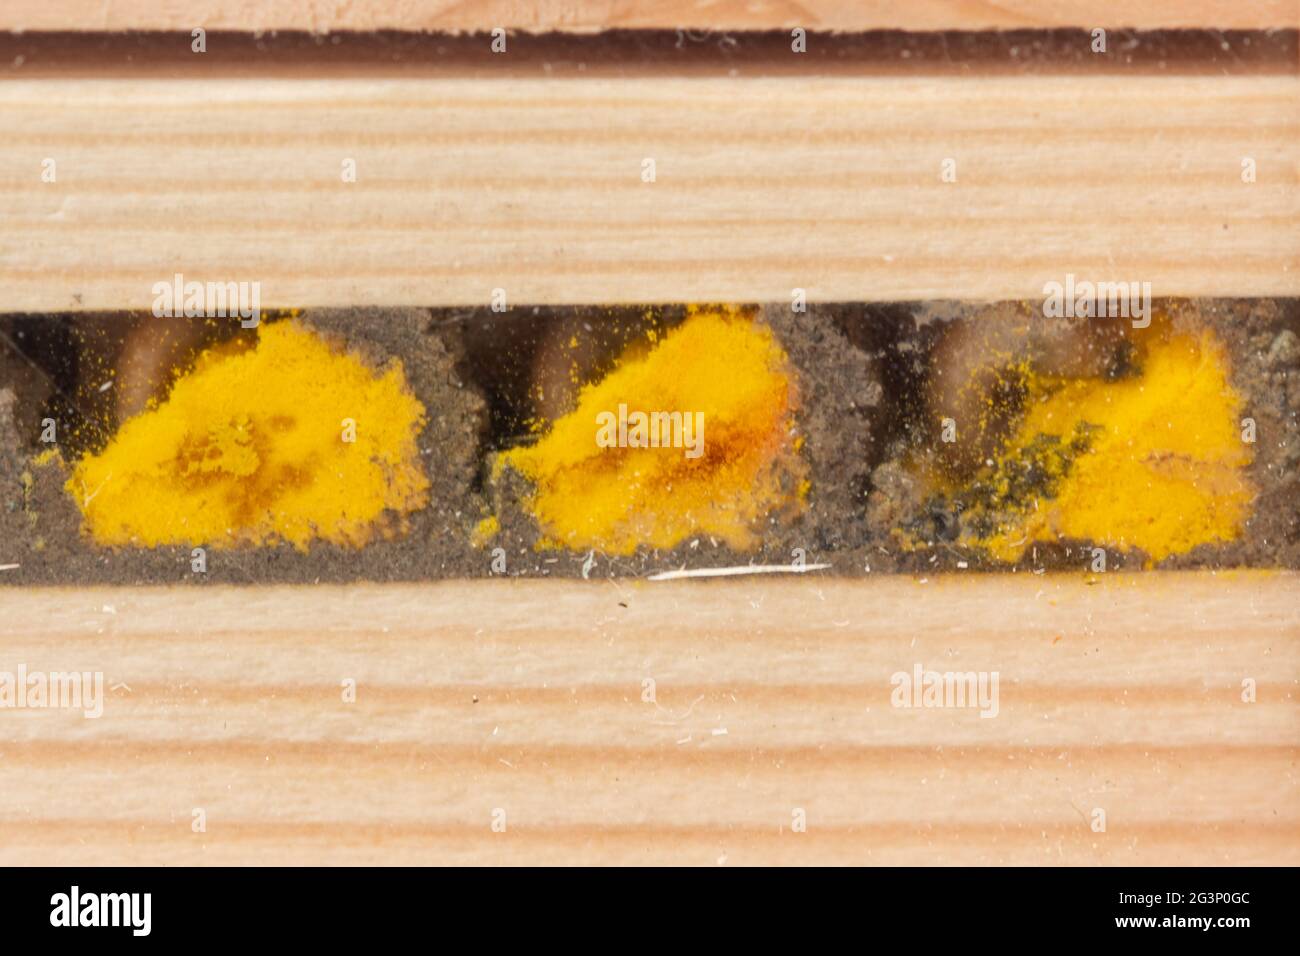 Interior of a bee hotel showing the pollen filled breeding cells, eggs and larva of a red mason bee (Osmia bicornis) divided by mud walls, UK Stock Photo